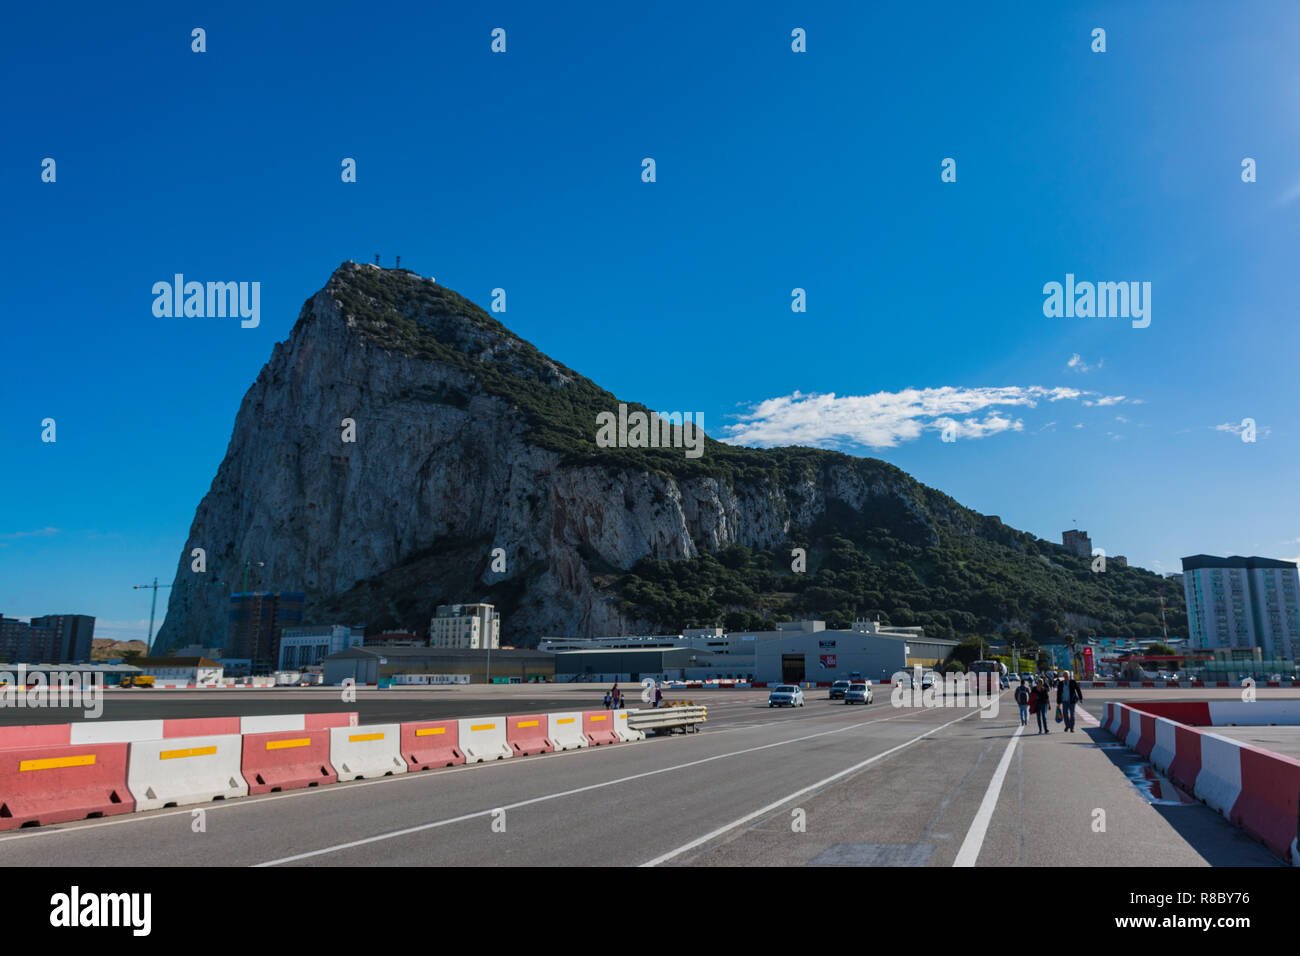 GIBRALTAR, GREAT BRITAIN, november 5, 2018 - The Rock of Gibraltar after crossing the border. Airport runway at foreground Stock Photo